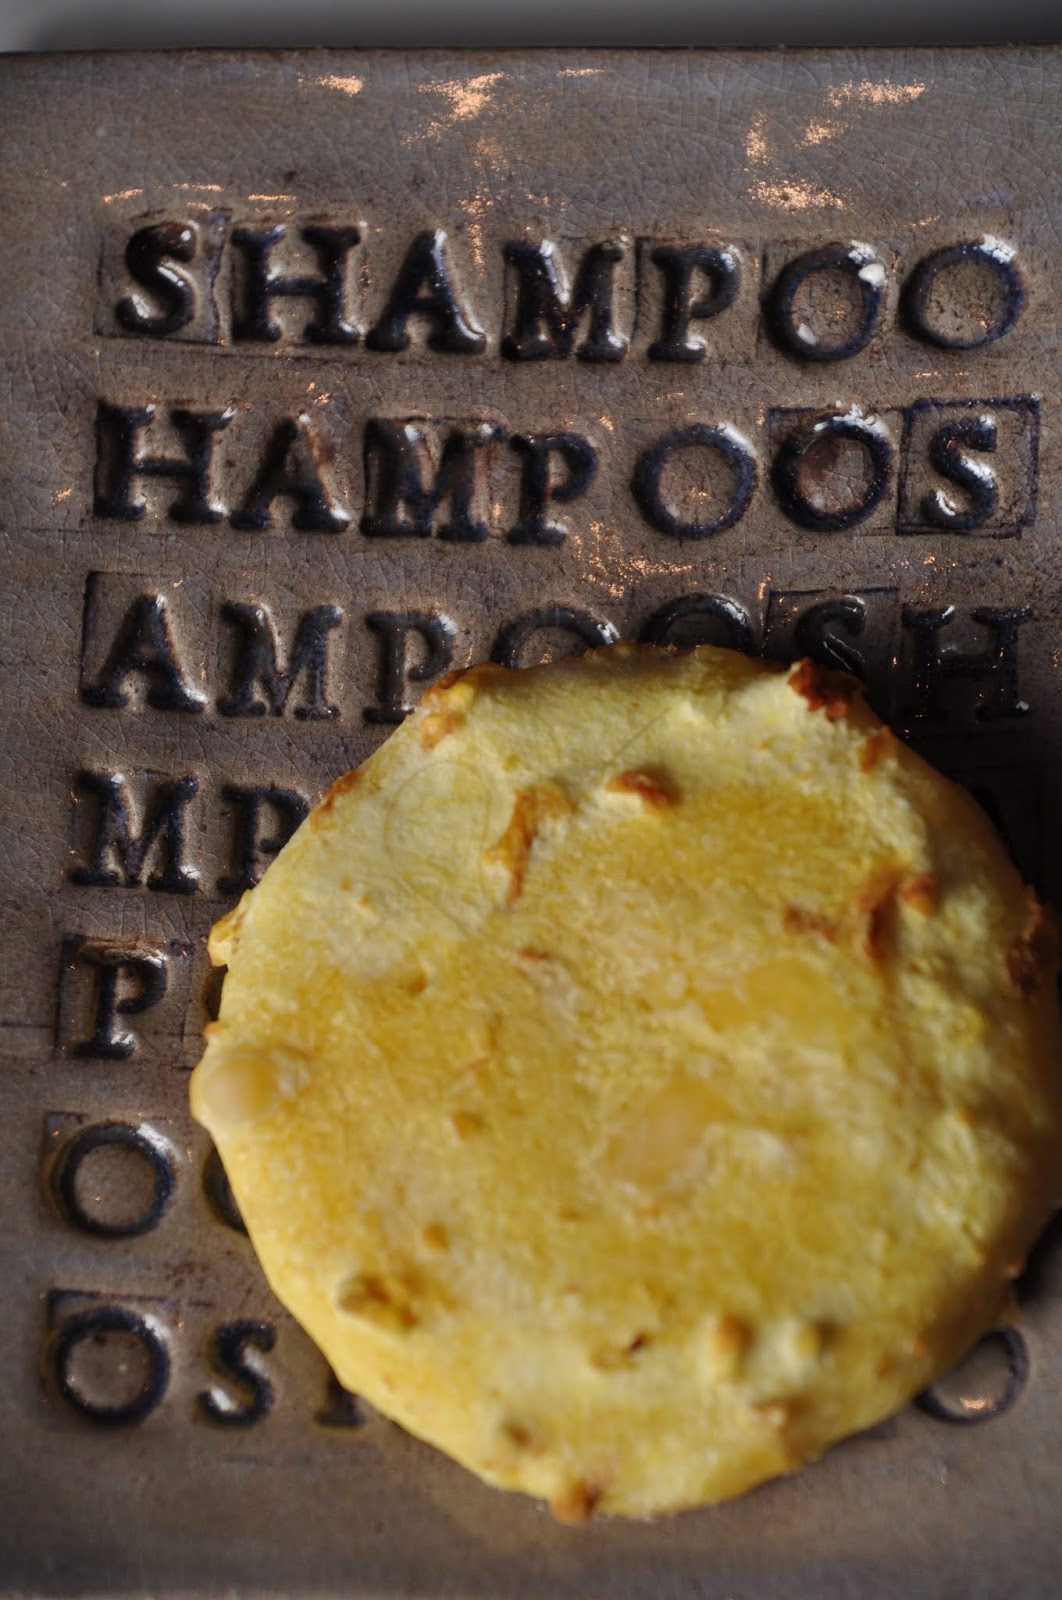 Shocking waste: Shampoo, soap and the meaning of the word "lush"